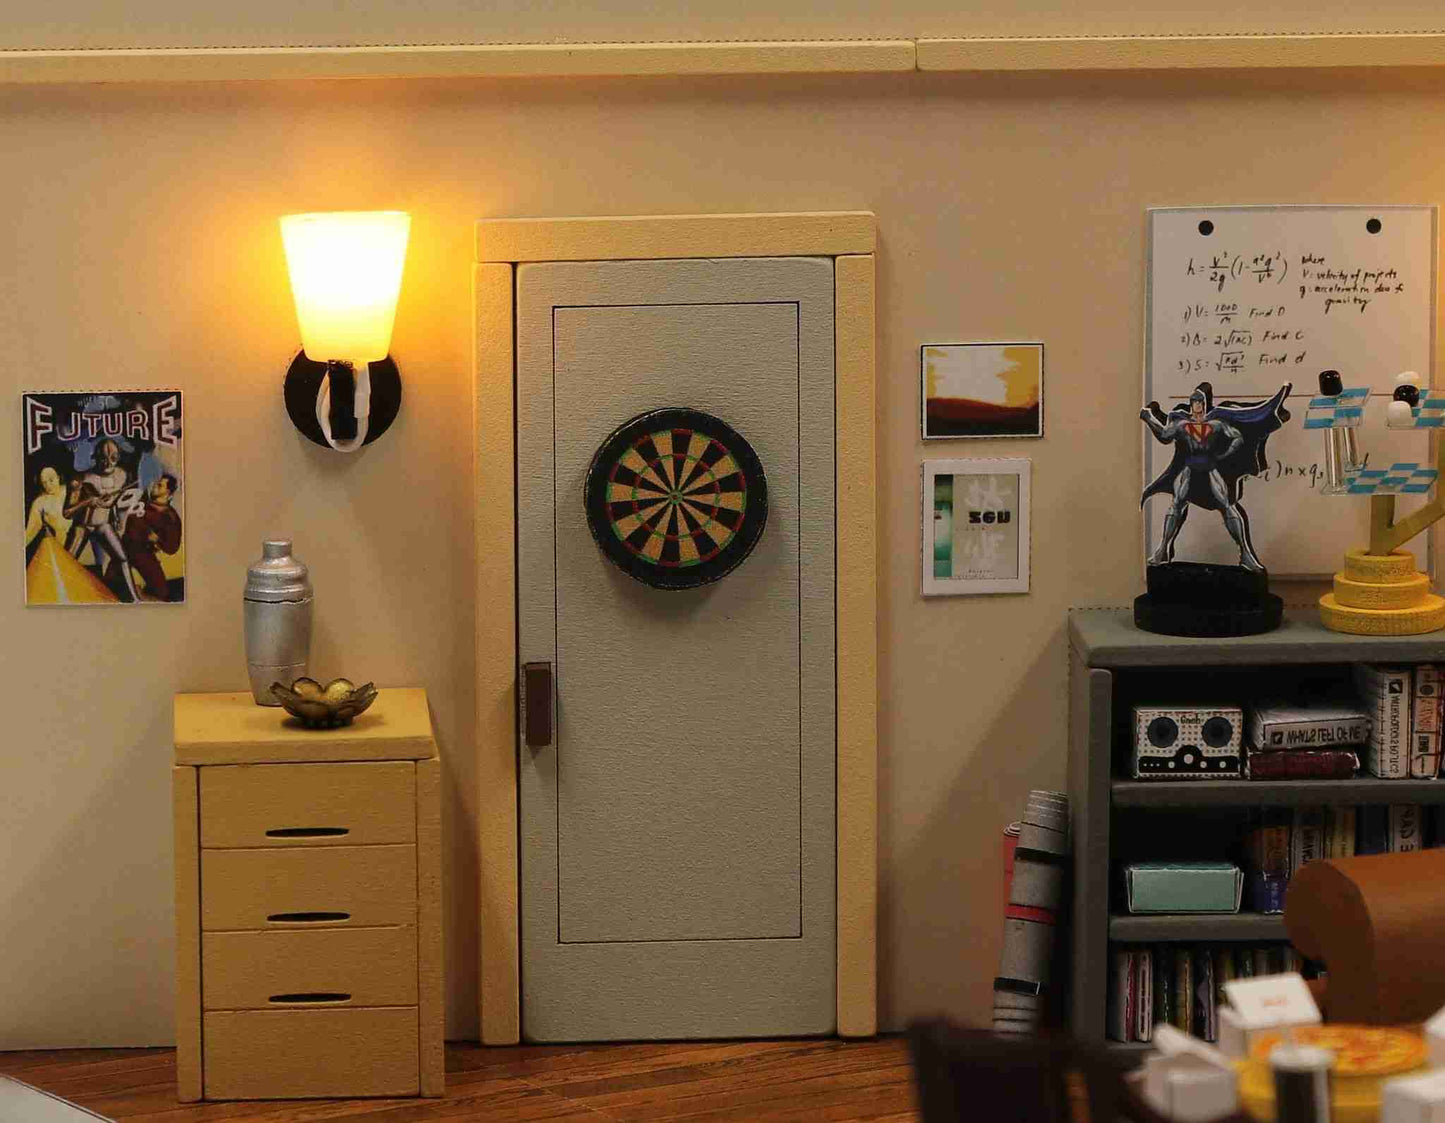 Sheldon's Apartment DIY Dollhouse Kit, a miniature house crafts inspired by the TV show "The Big Bang Theory", perfect for model building lovers, dollhouse collectors, home decor, A great DIY project for "The Big Bang Theory" fans.